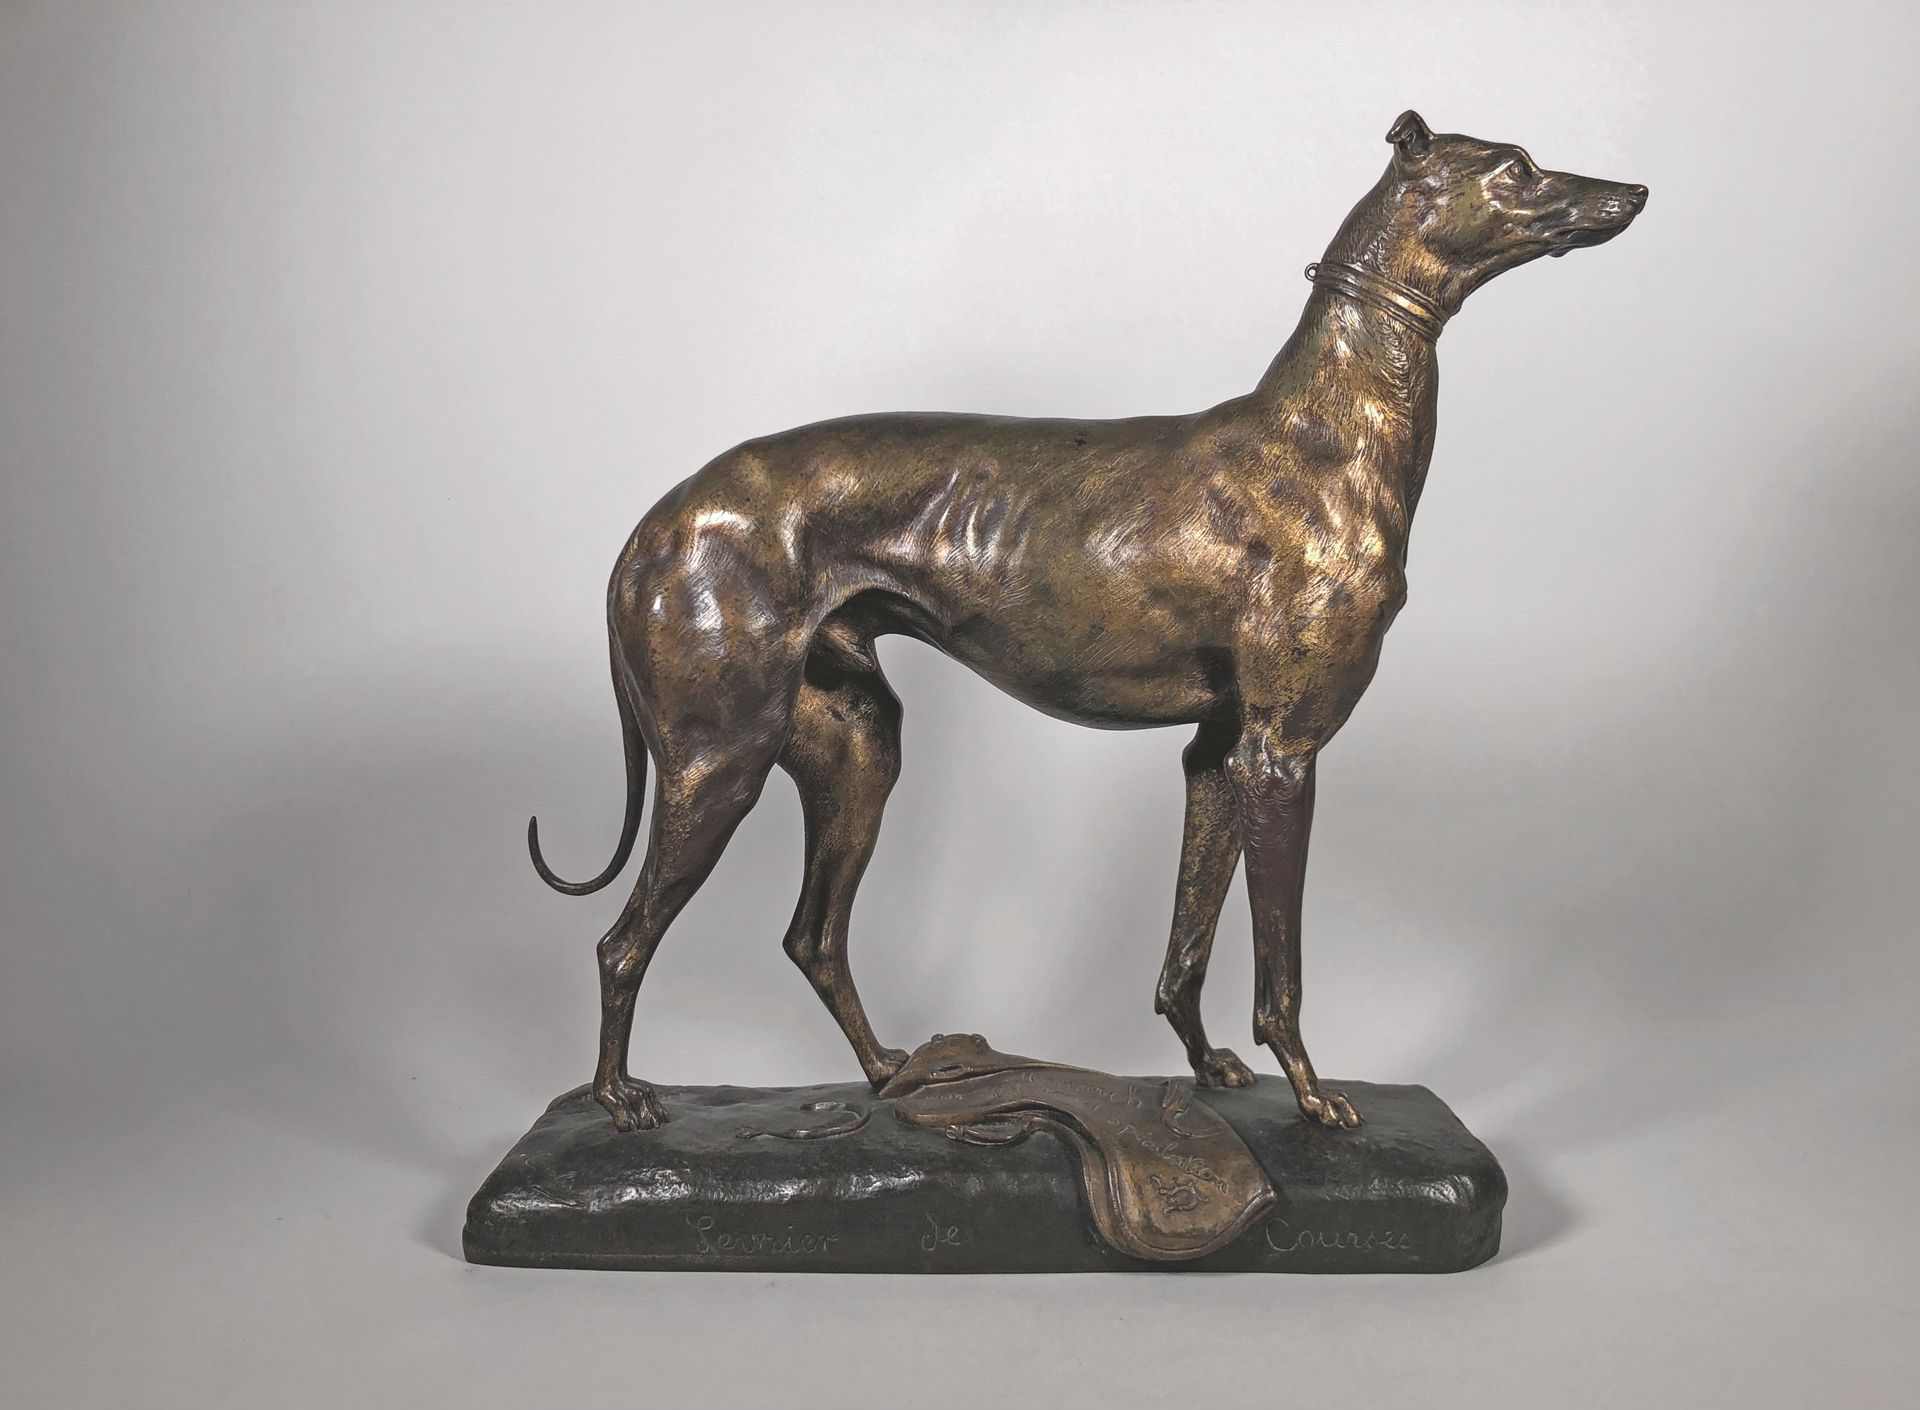 Null Paul COMOLERA (1818-1897)

"Racing greyhound, Monarch by Misterton and Spec&hellip;